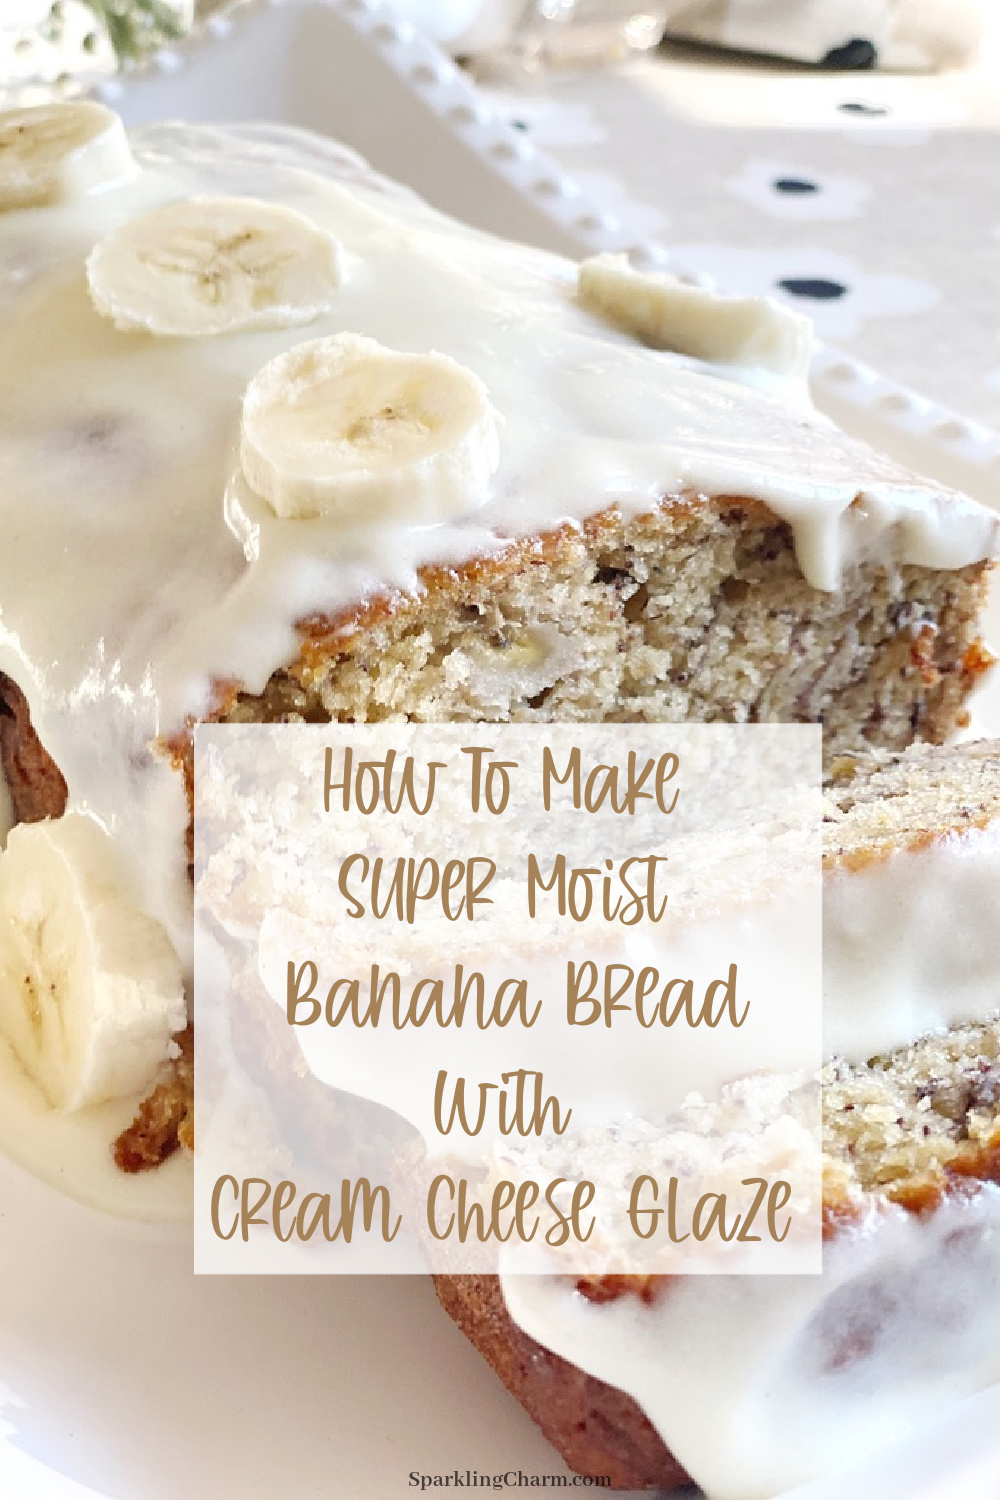 The Best Banana Bread with Cream Cheese Glaze